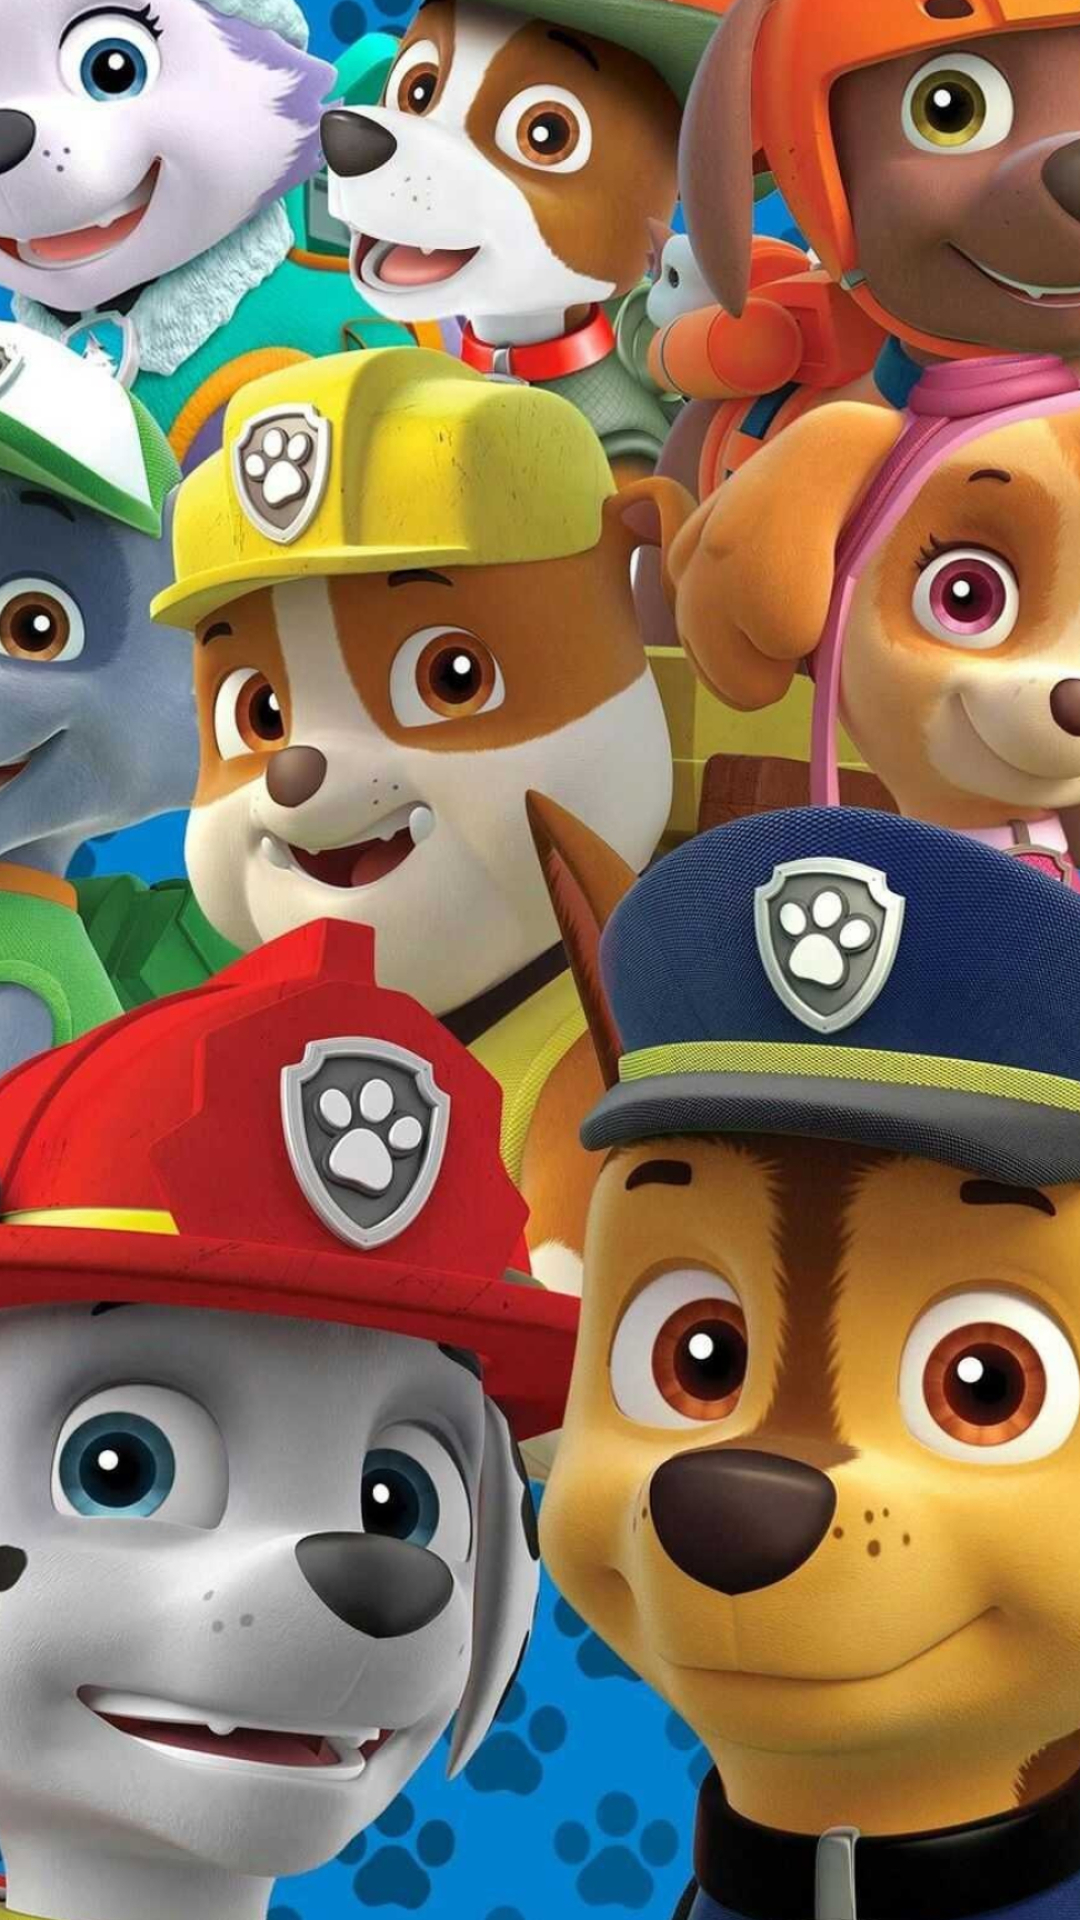 Paw Patrol background, Animated adventure, Canine heroes, Exciting missions, 1080x1920 Full HD Phone